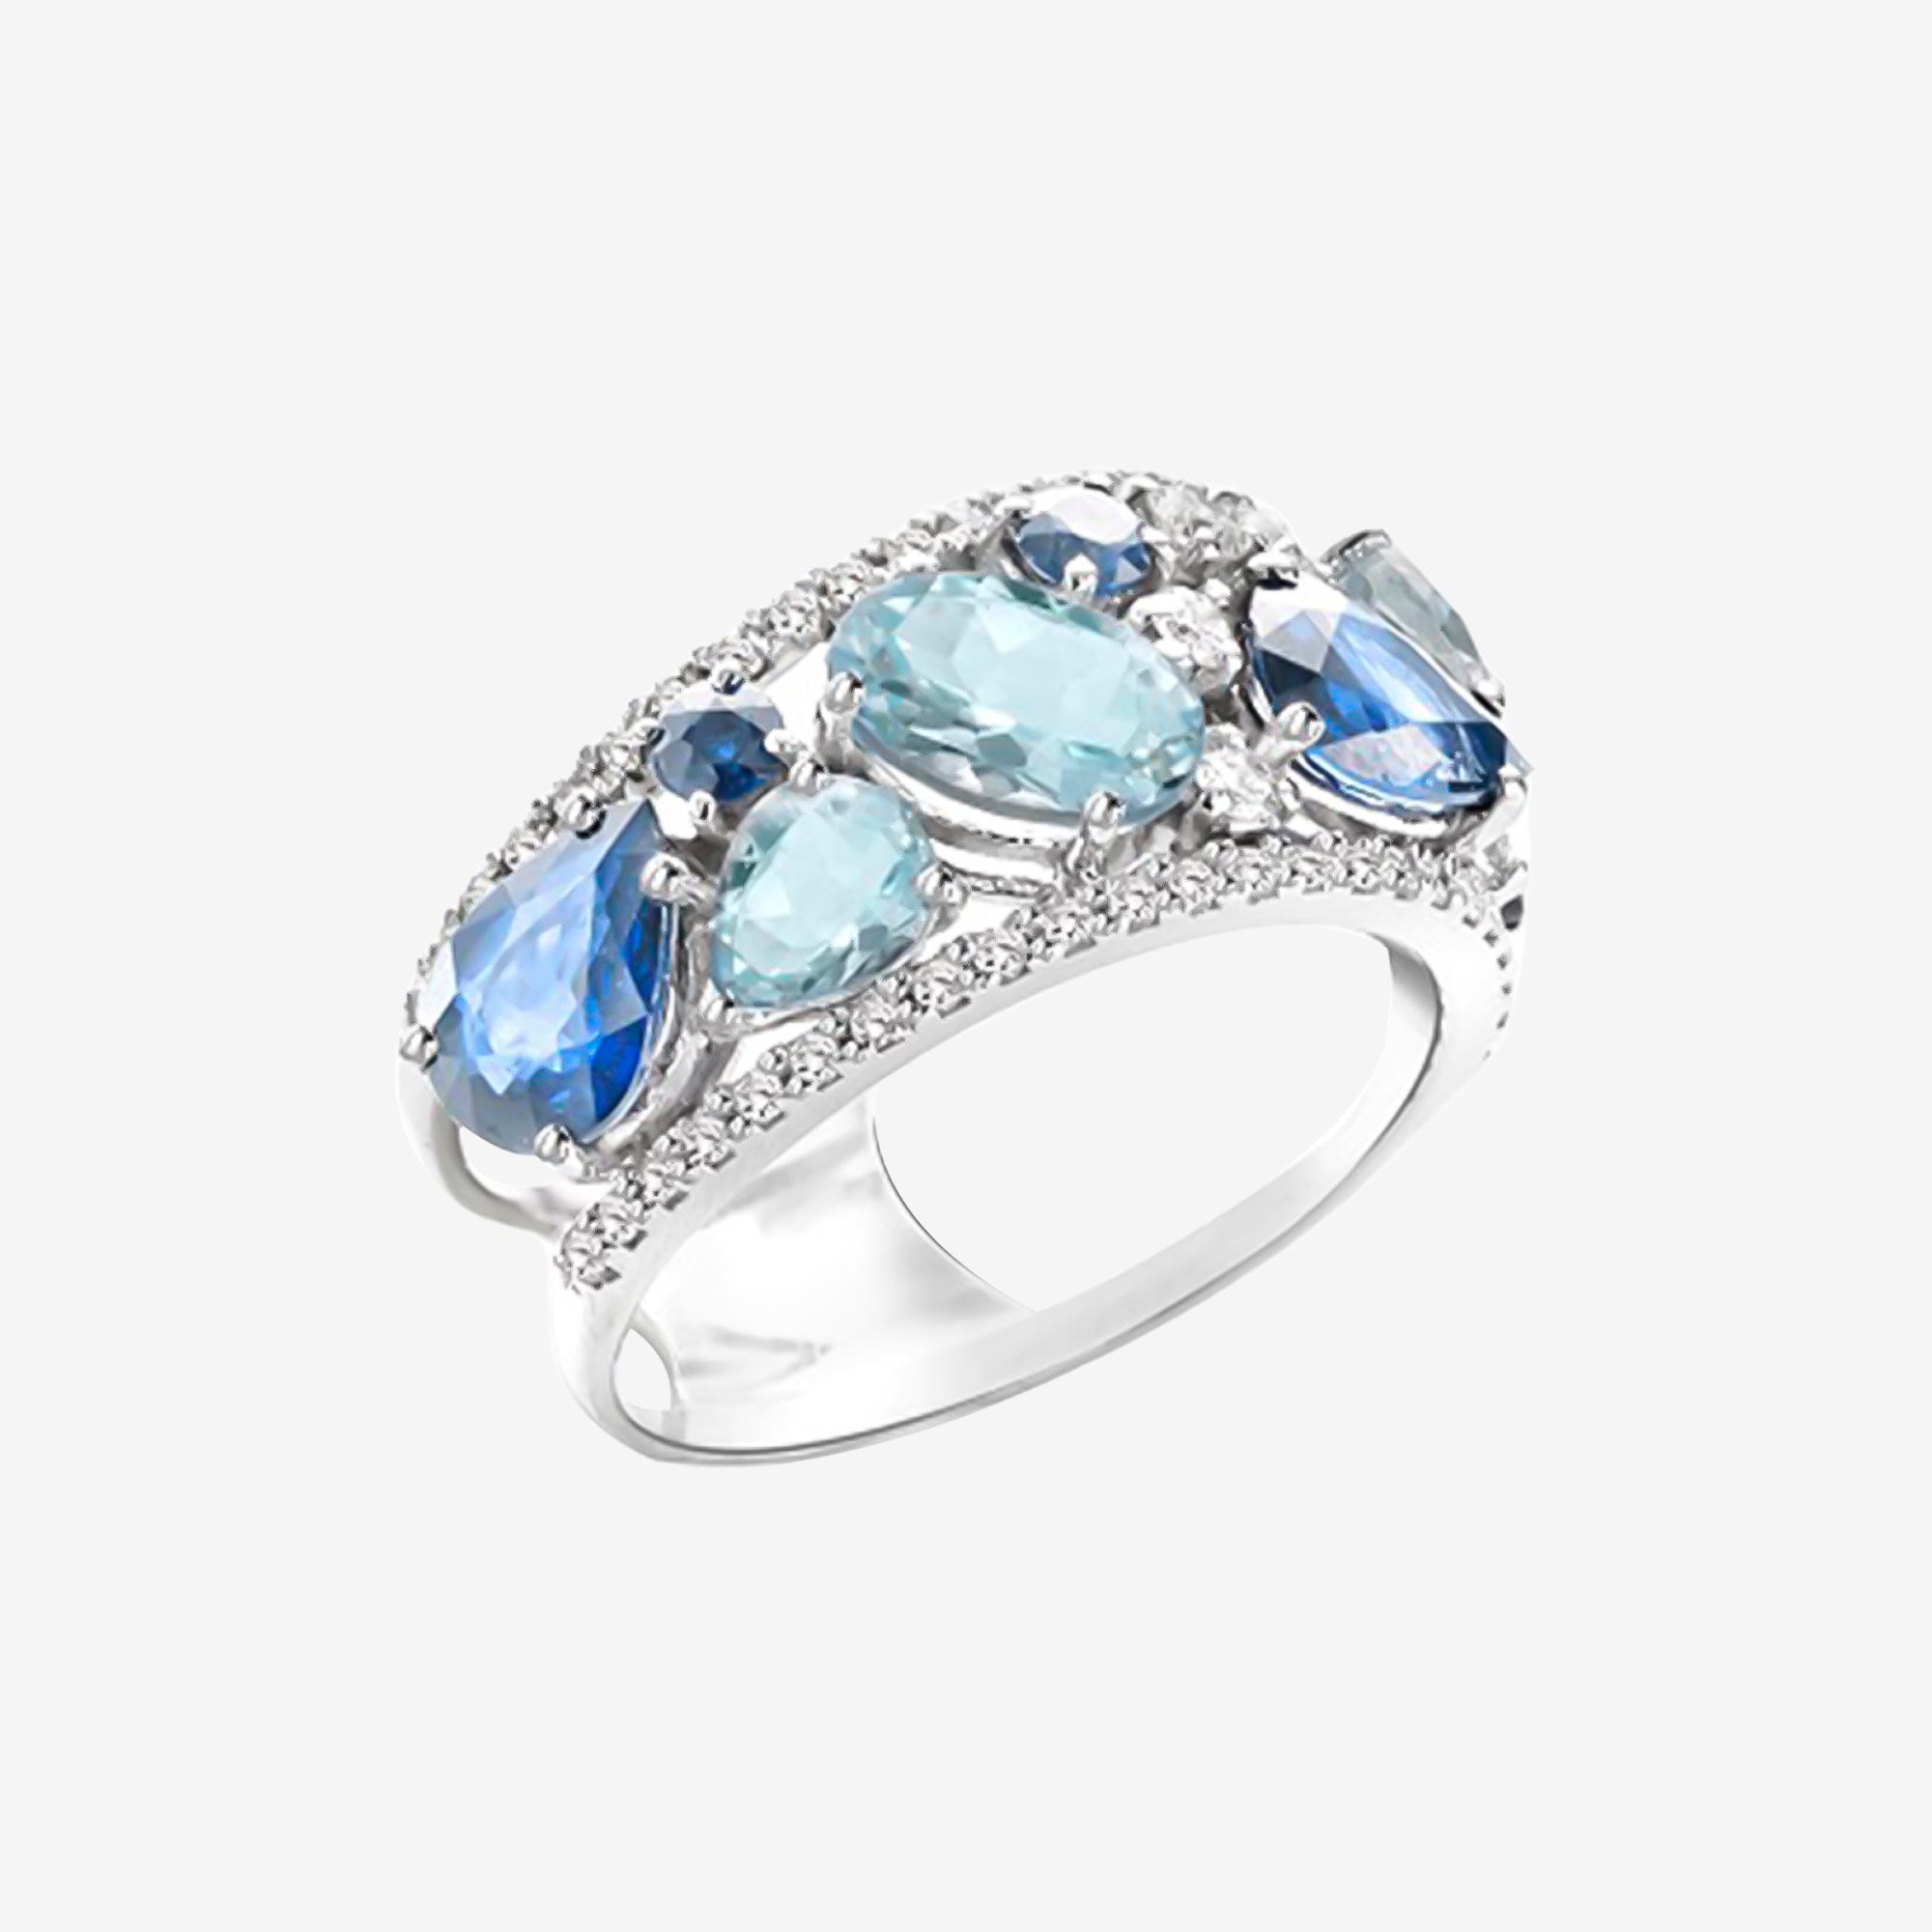 Conglomerate Ring With Diamonds, Sapphires and Aquamarine